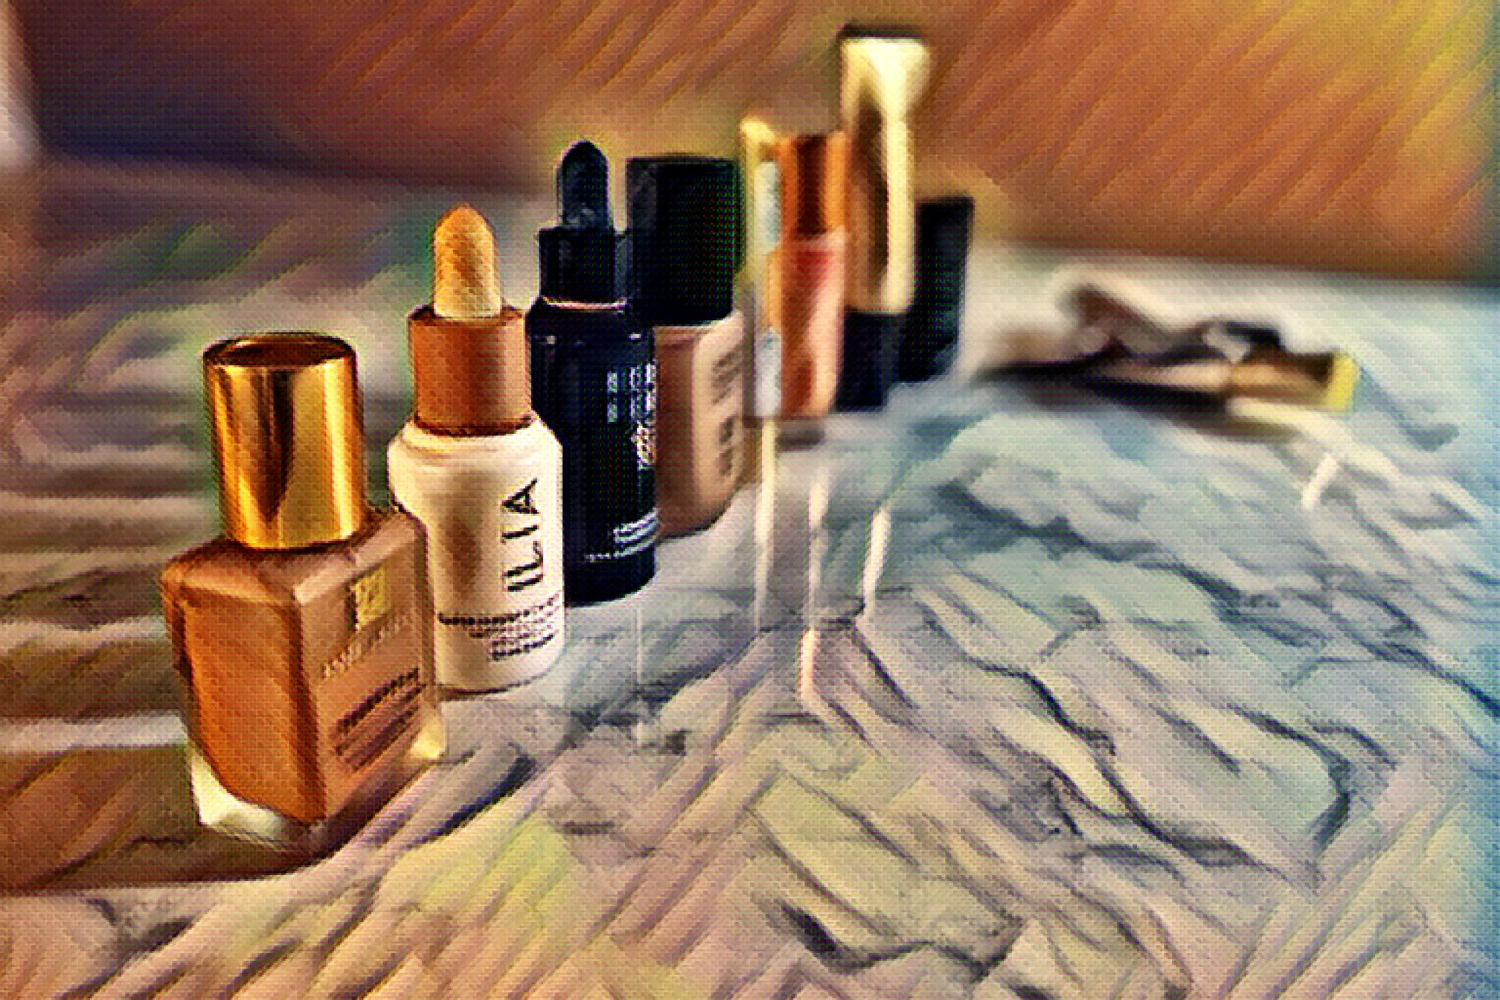 The Art of Mixing Foundations